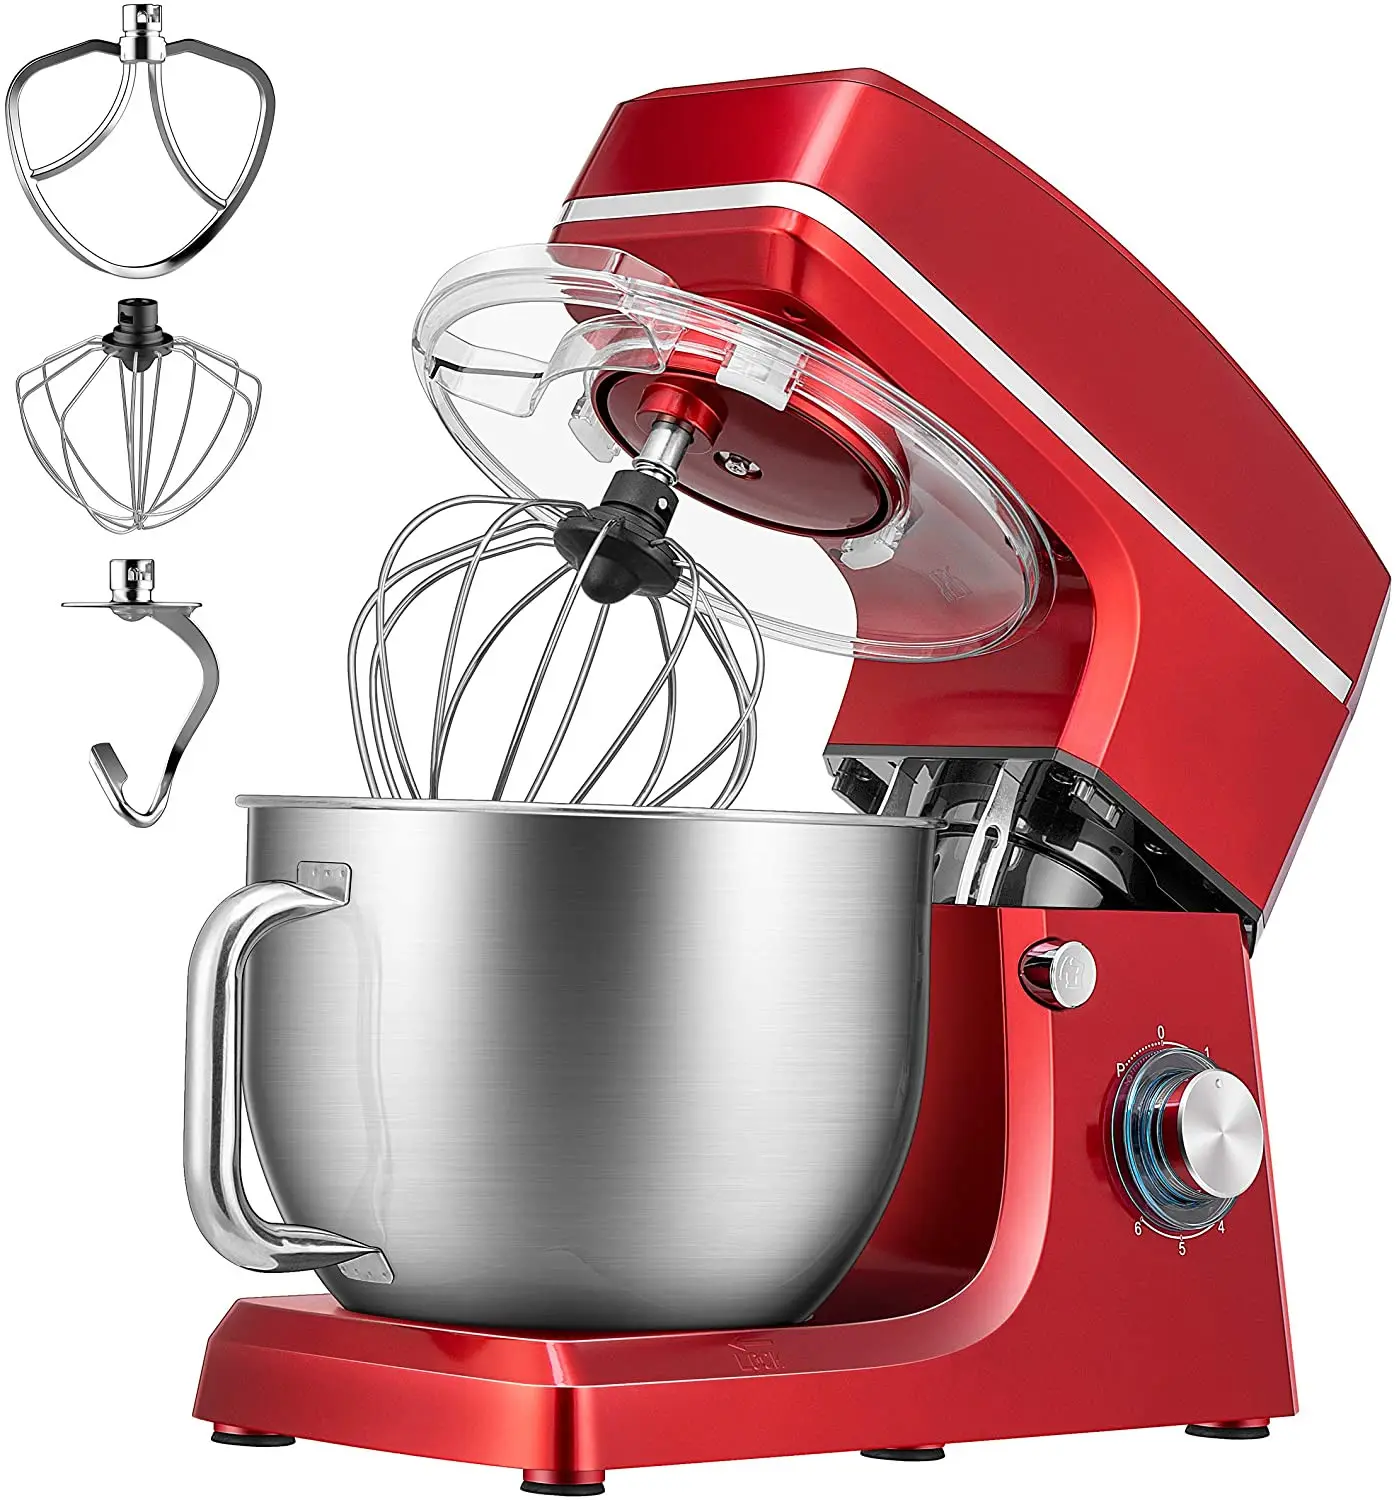 Multifunctional Food Processor Kitchen Machine Stand Mixer With Bowl